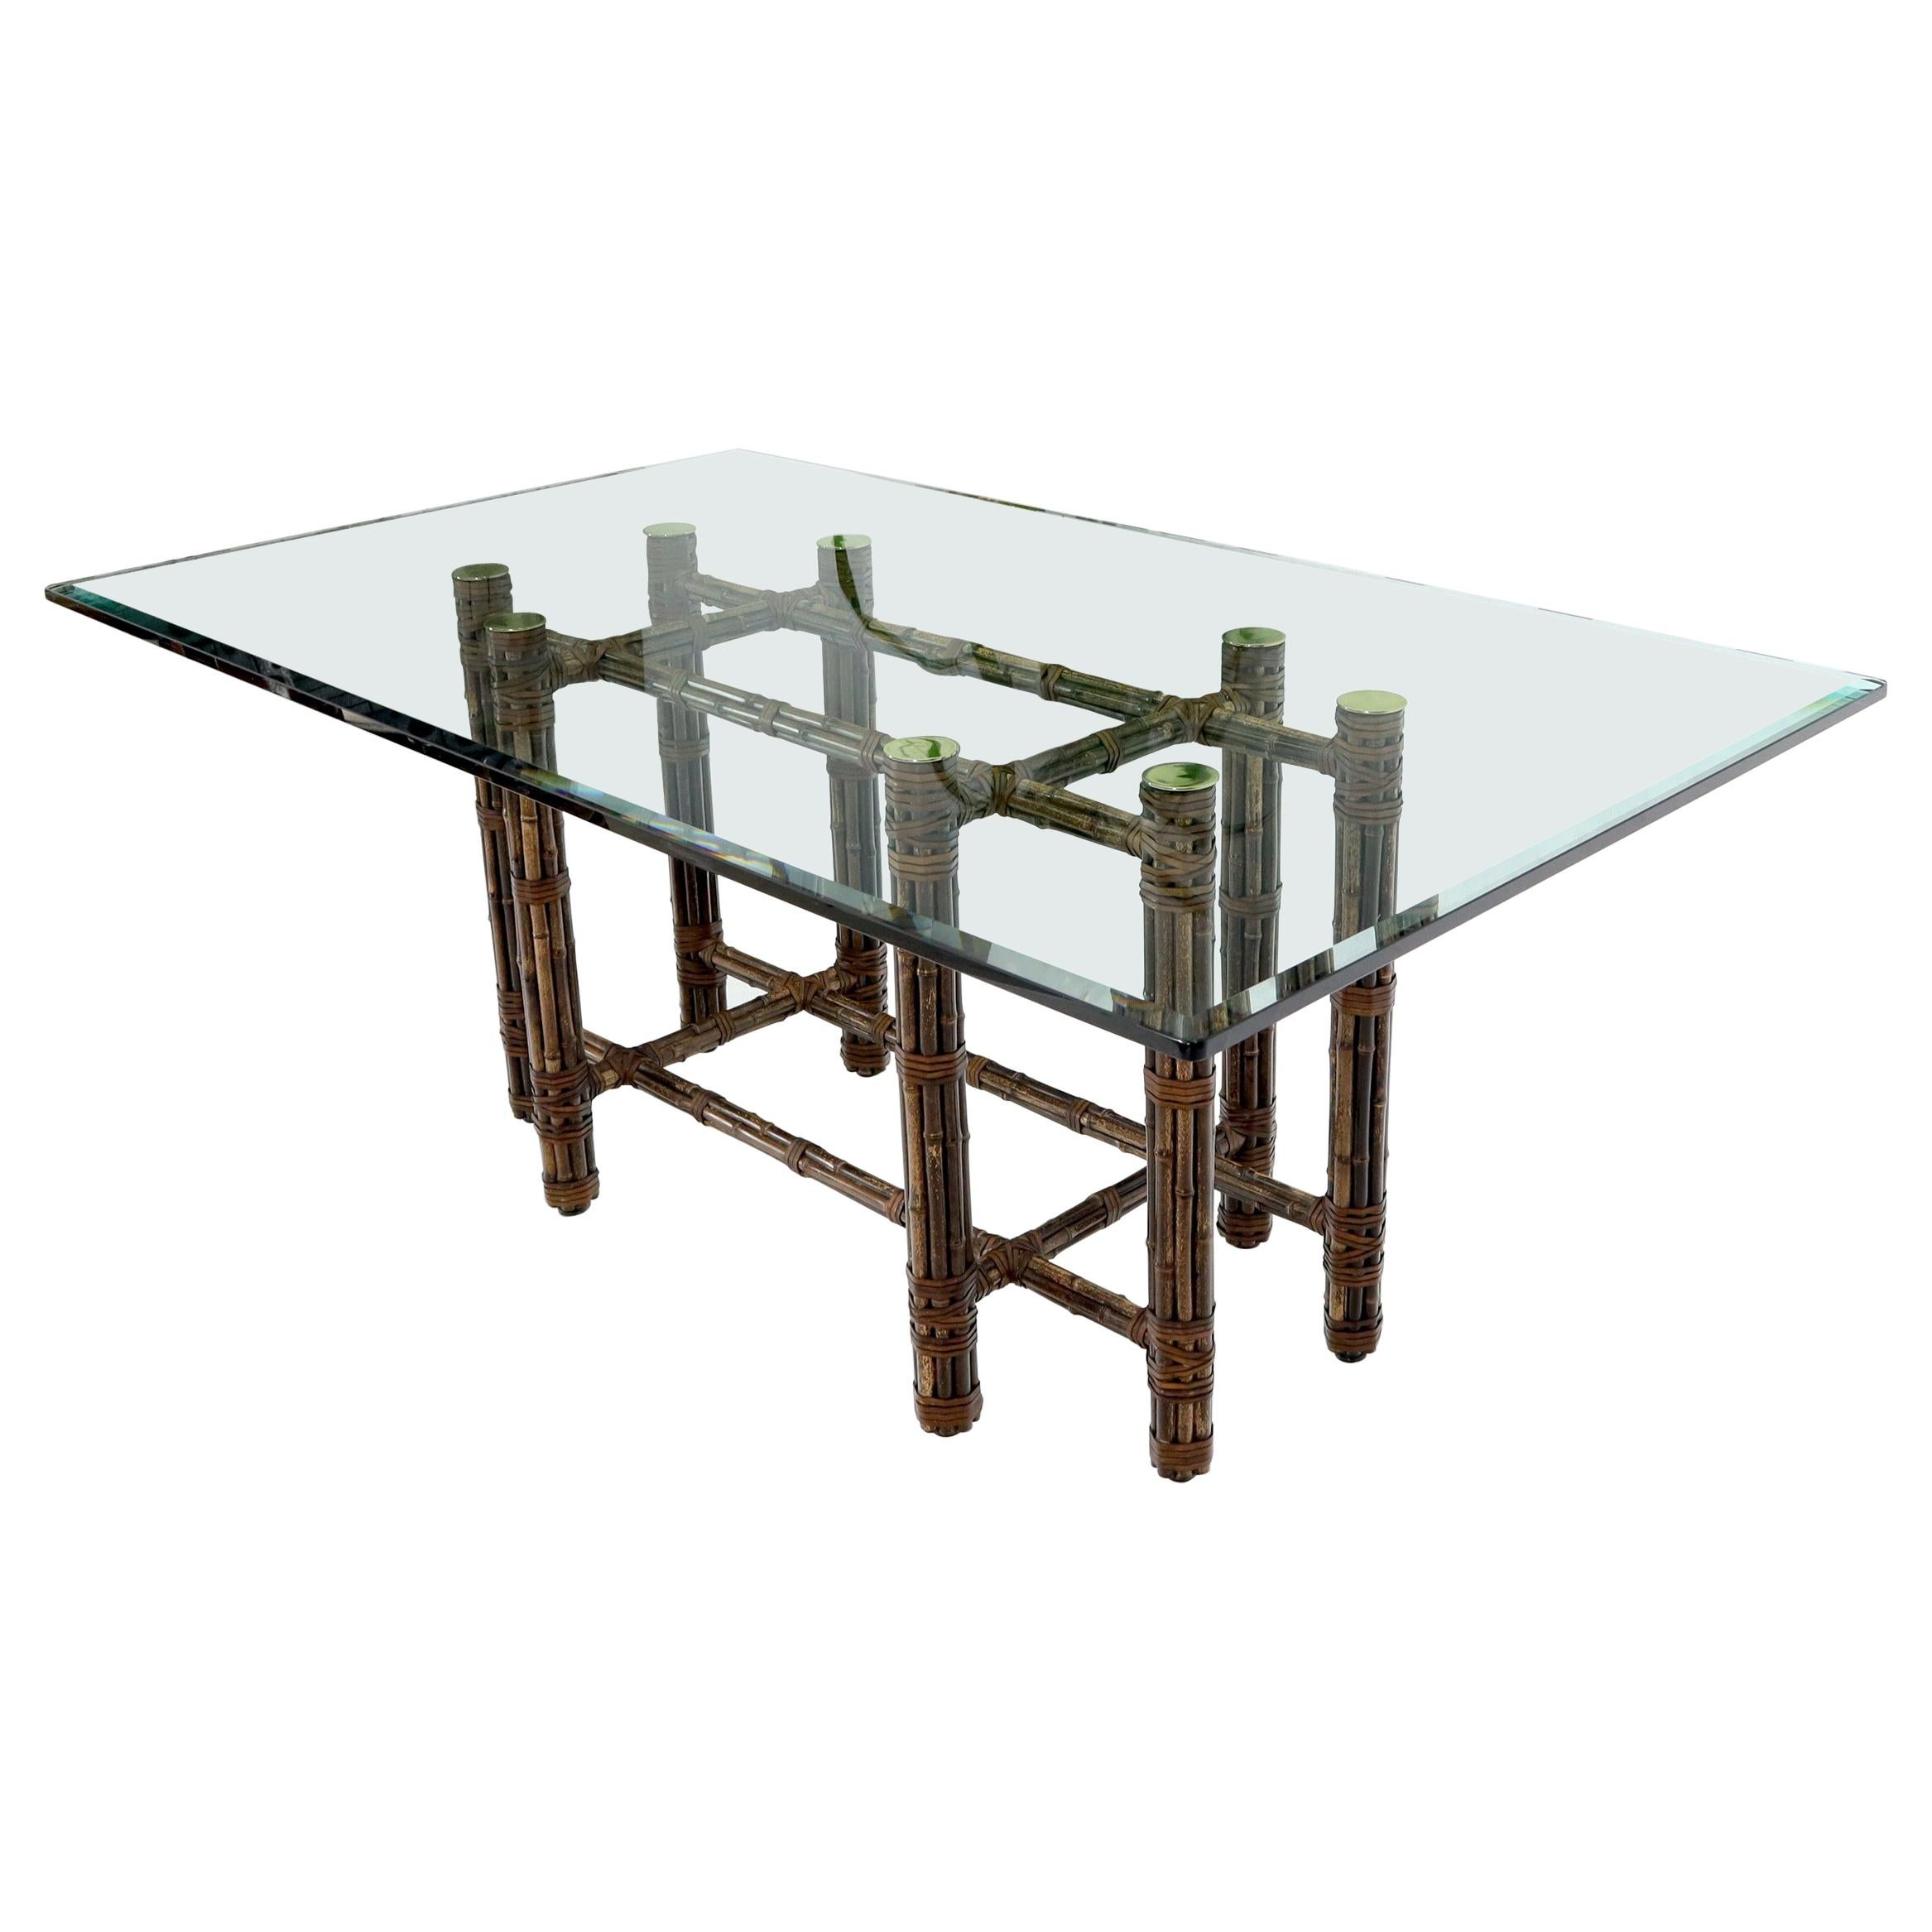 McGuire Bamboo Leather Straps Brass Caps Base Glass Top Rectangle Dining Table